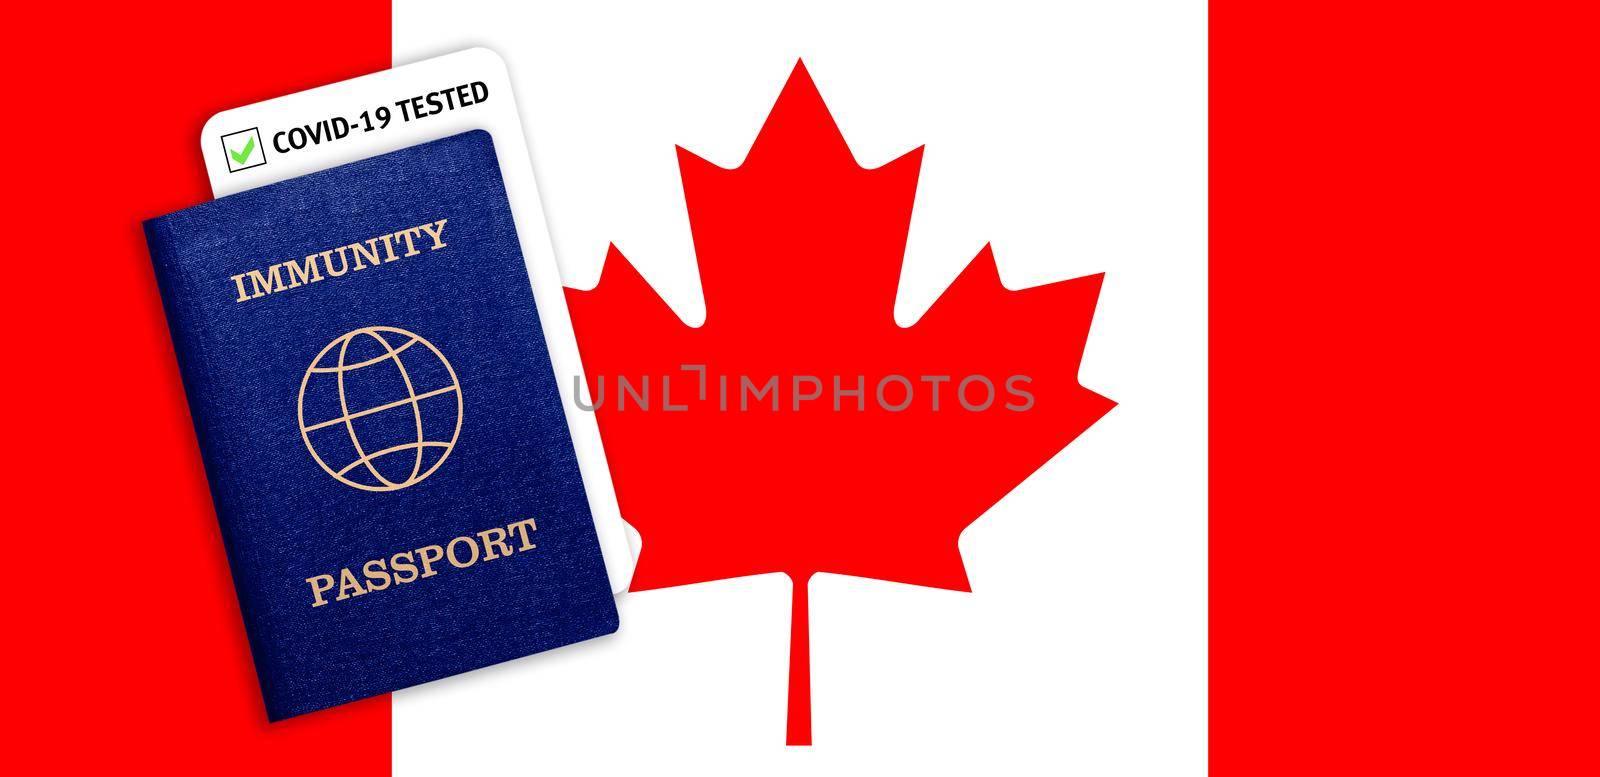 Immunity passport and test result for COVID-19 on flag of Canada by galinasharapova